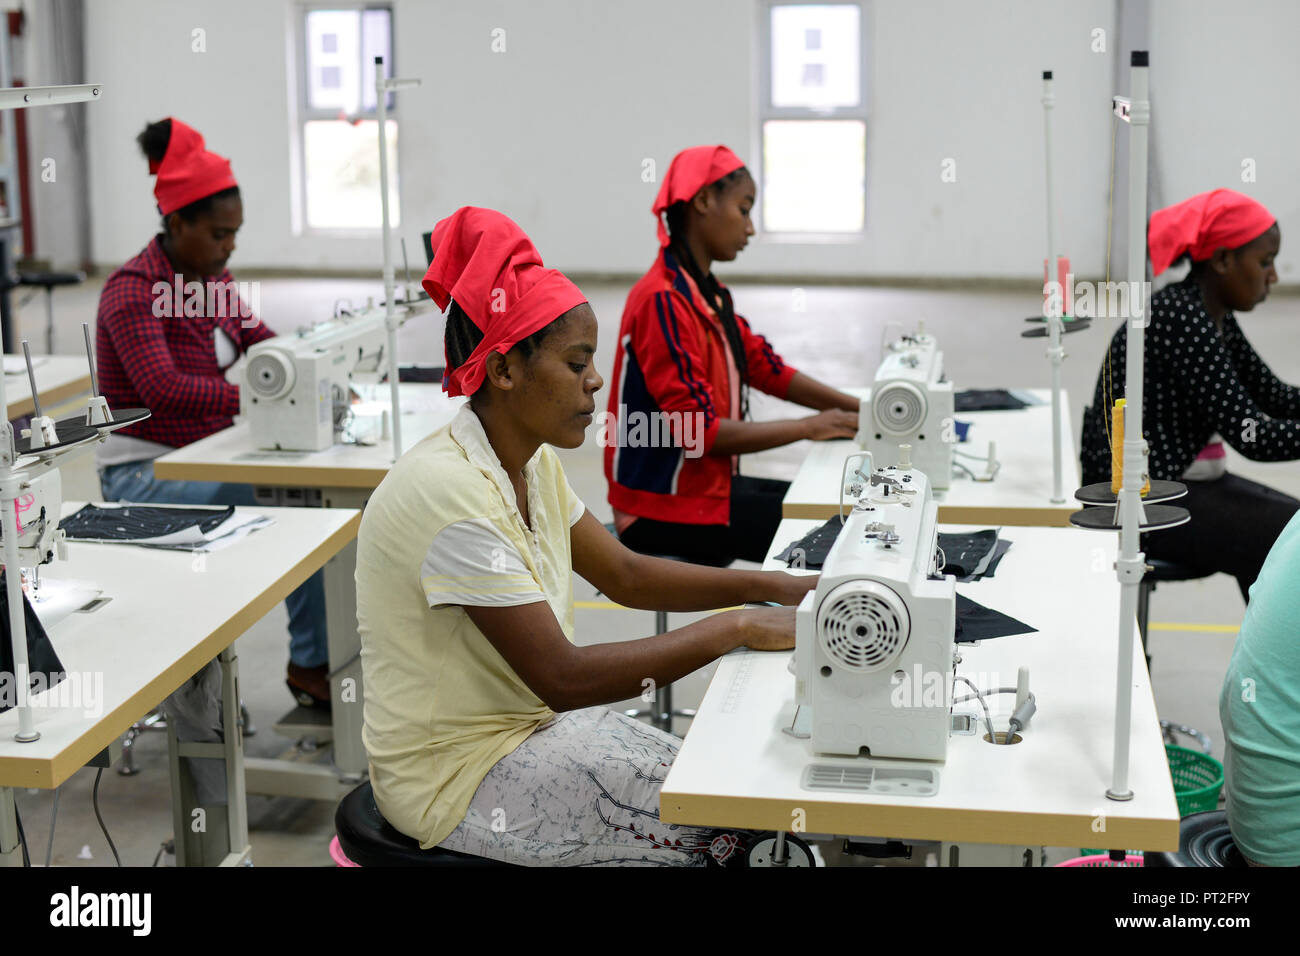 ETHIOPIA , Southern Nations, Hawassa or Awasa, Hawassa Industrial Park, chinese-built for the ethiopian government to attract foreign investors with low rent and tax free to establish a textile industry and create thousands of new jobs, taiwanese company Everest Textile Co. Ltd.produces textiles from synthetic fabric for export, training department for new worker / AETHIOPIEN, Hawassa, Industriepark, gebaut durch chinesische Firmen fuer die ethiopische Regierung um die Hallen fuer Textilbetriebe von Investoren zu vermieten, taiwanesische Firma Everest Textile Co. Ltd. produziert Textilien aus  Stock Photo